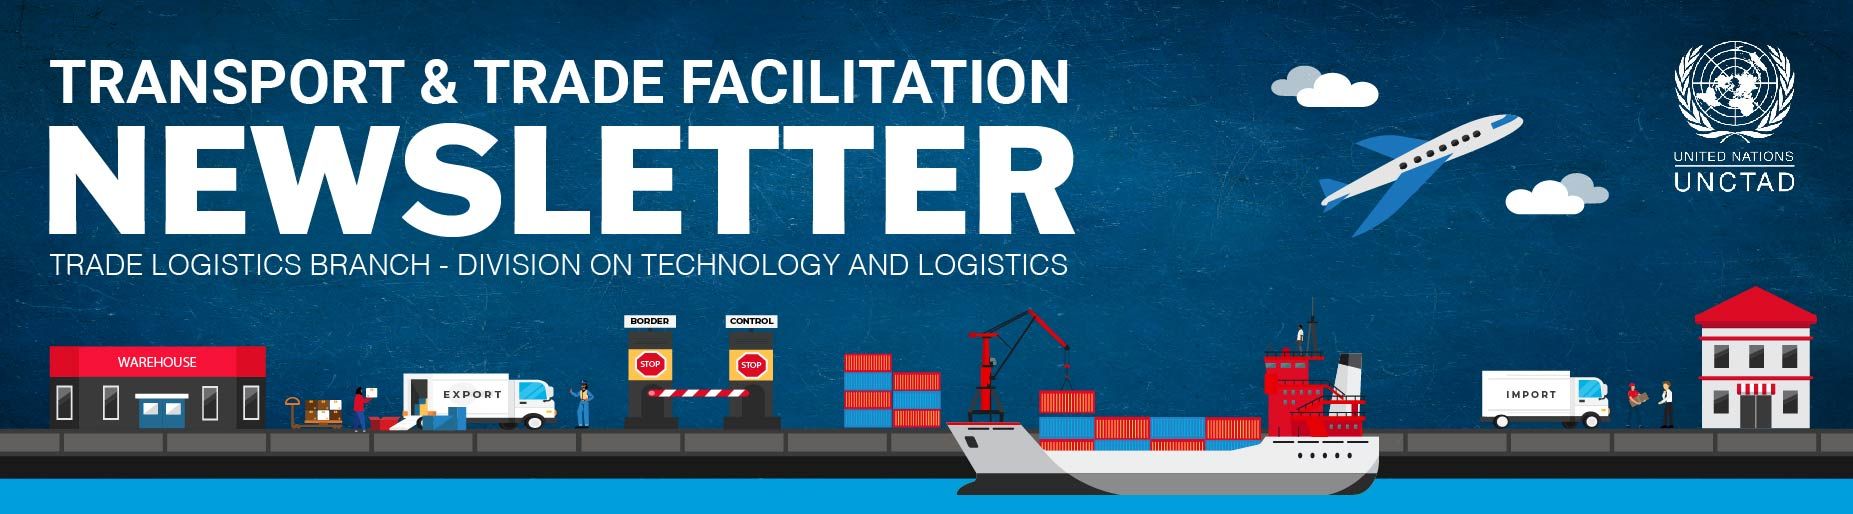 Unctad E Learning For National Trade Facilitation Committees